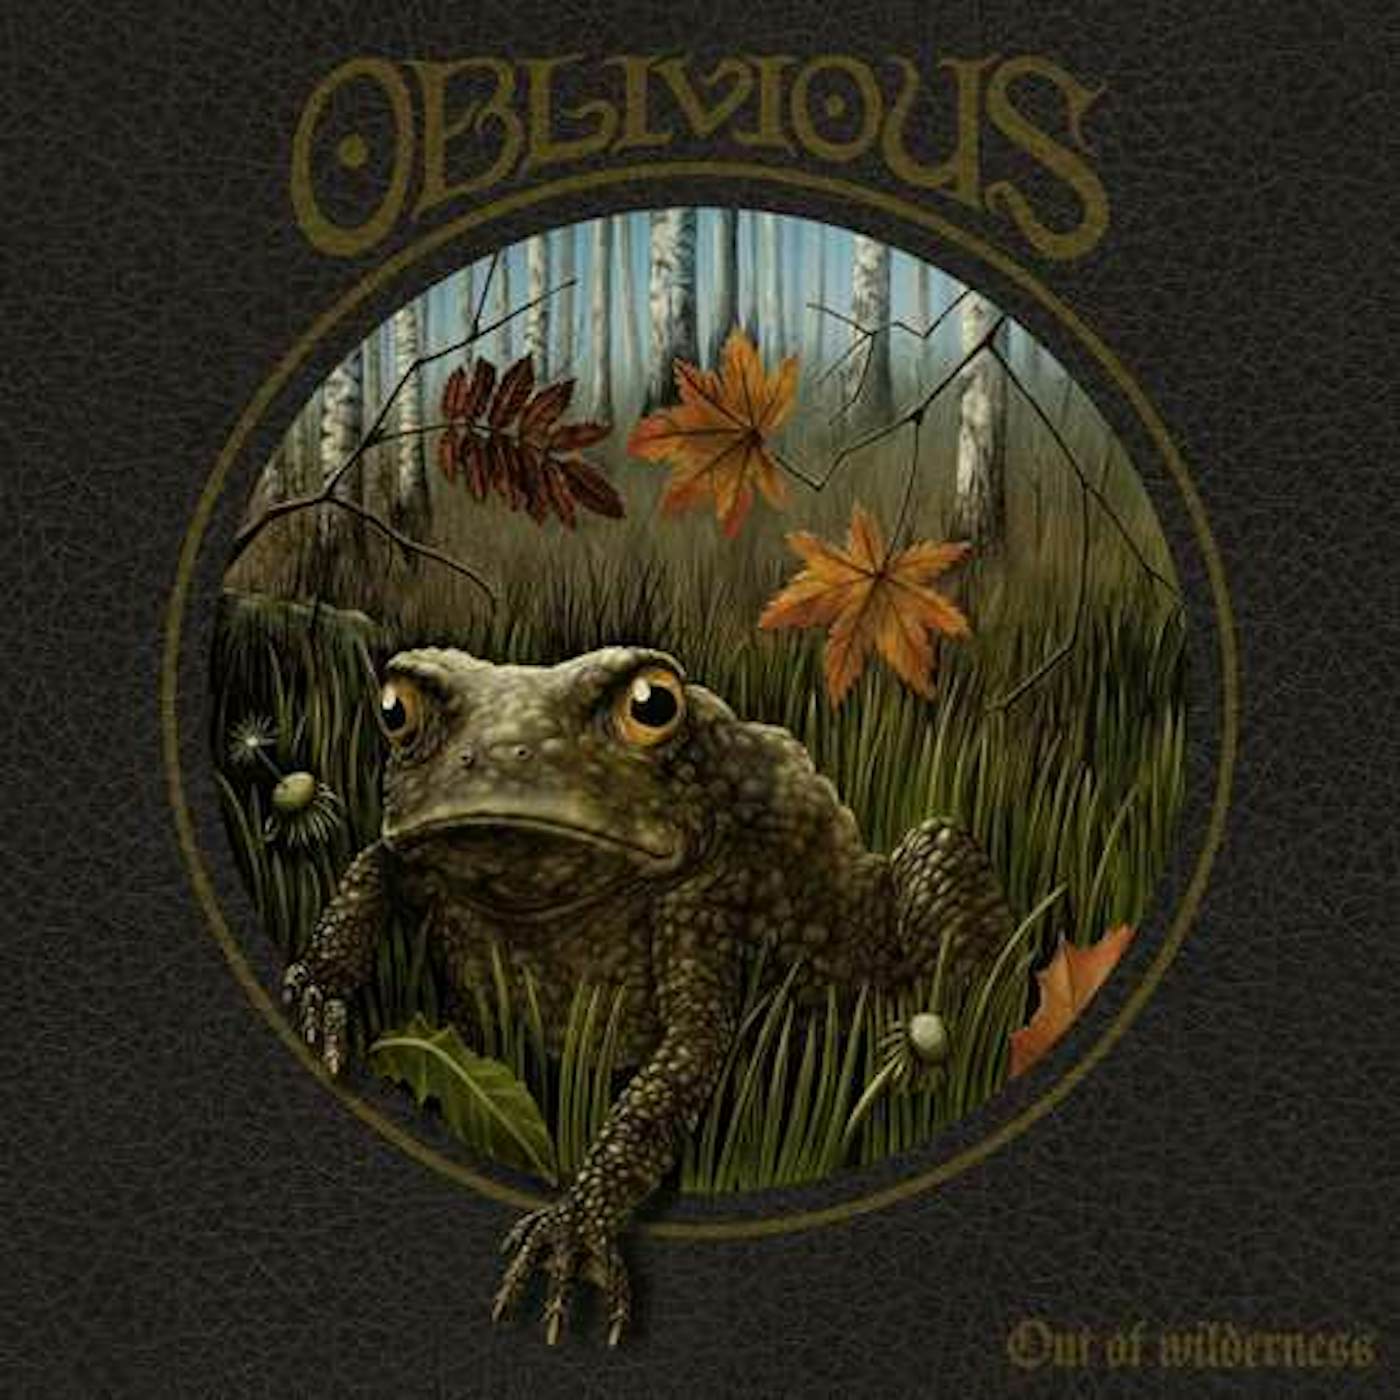 Oblivious OUT OF WILDERNESS CD